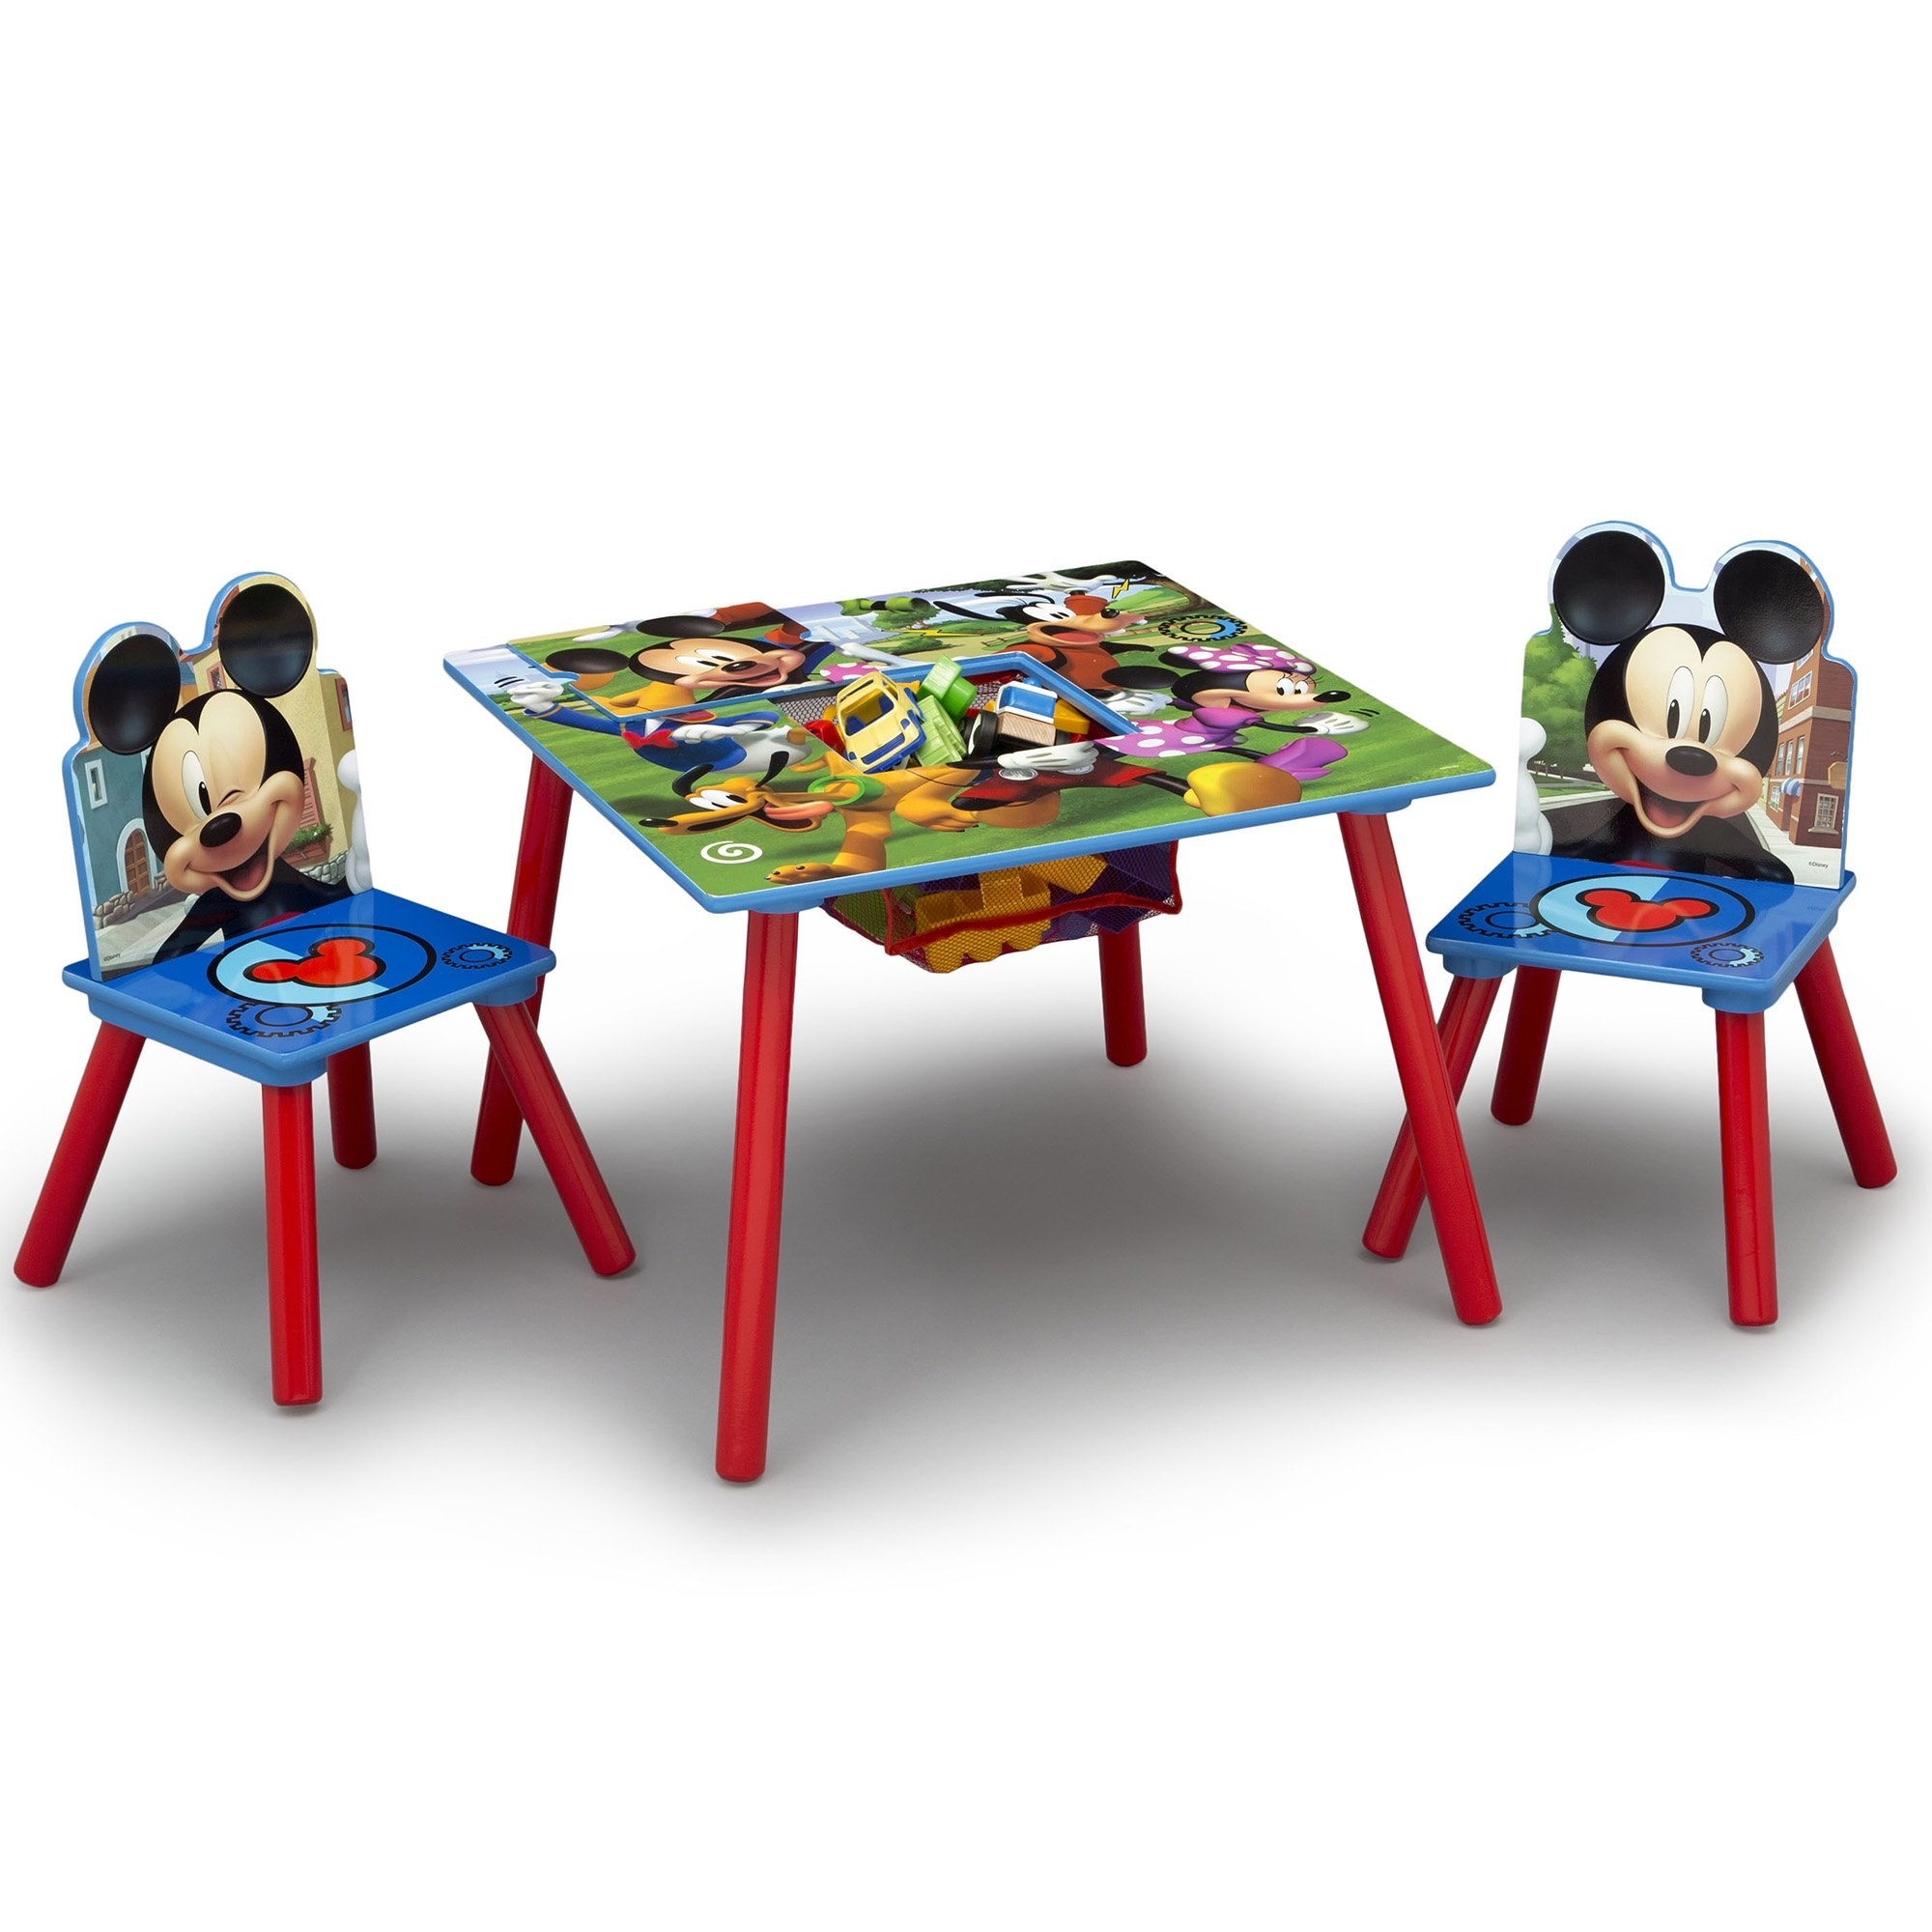 The Mickey Mouse table and chairs